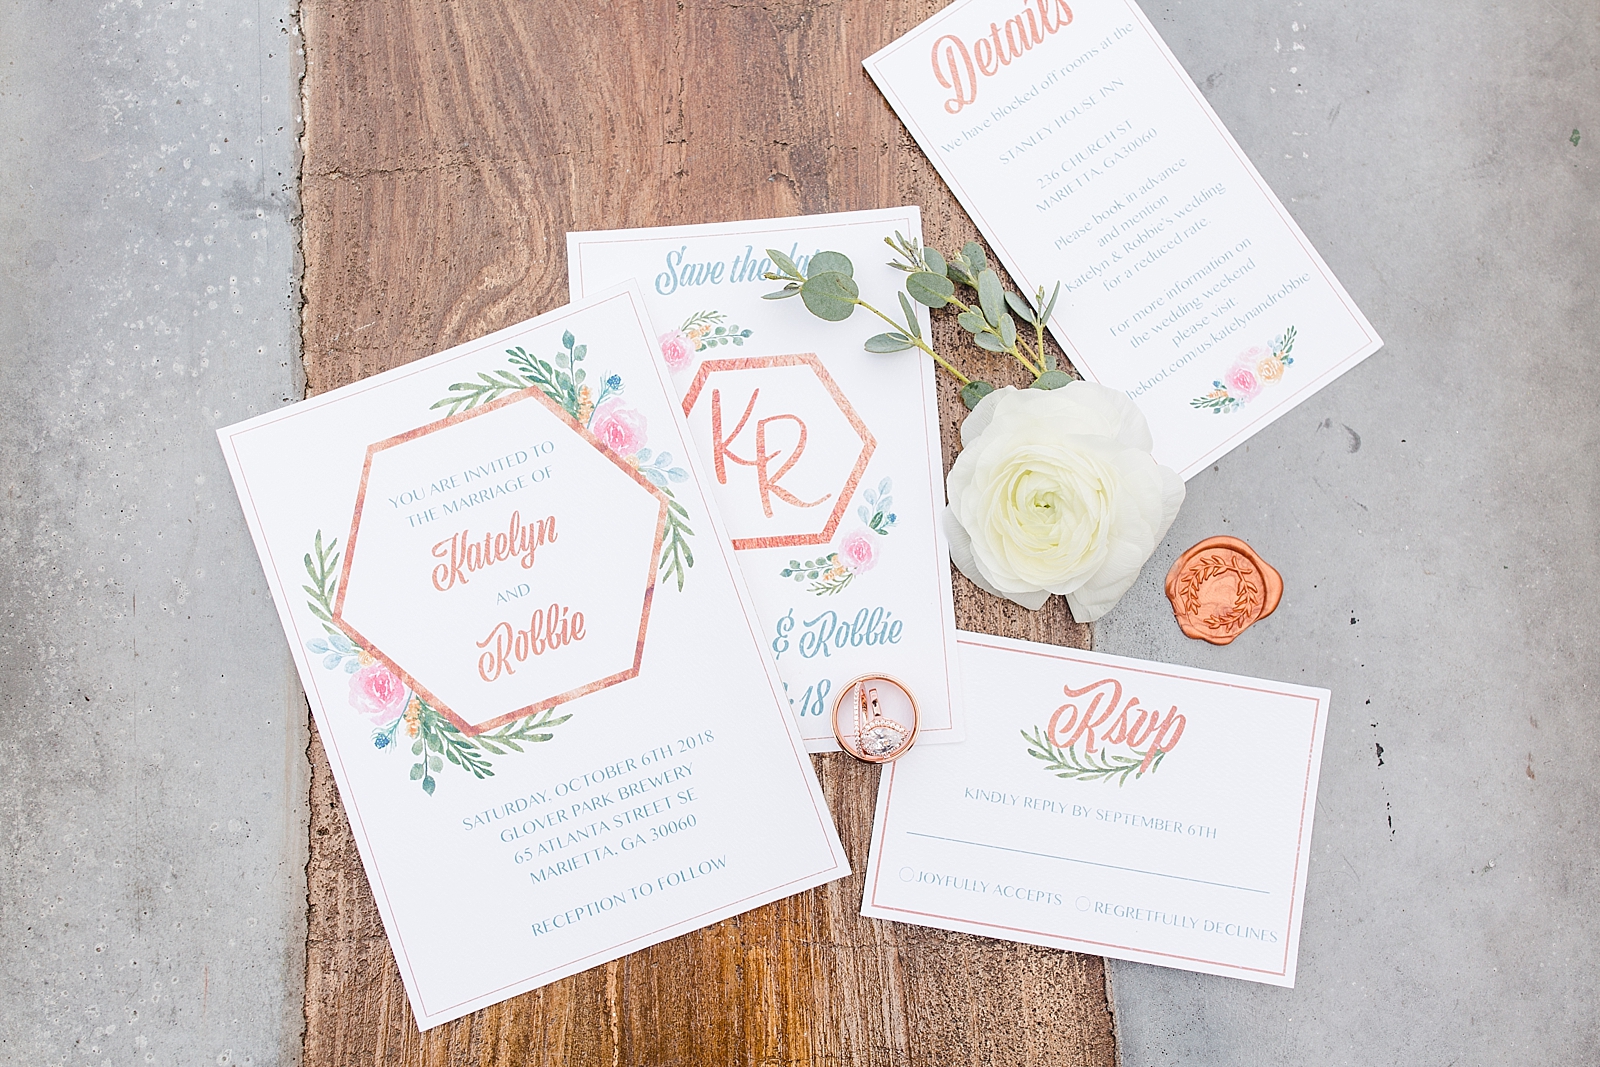 Glover Park Brewery Wedding Invitation Suite with white rose and wedding rings Photo